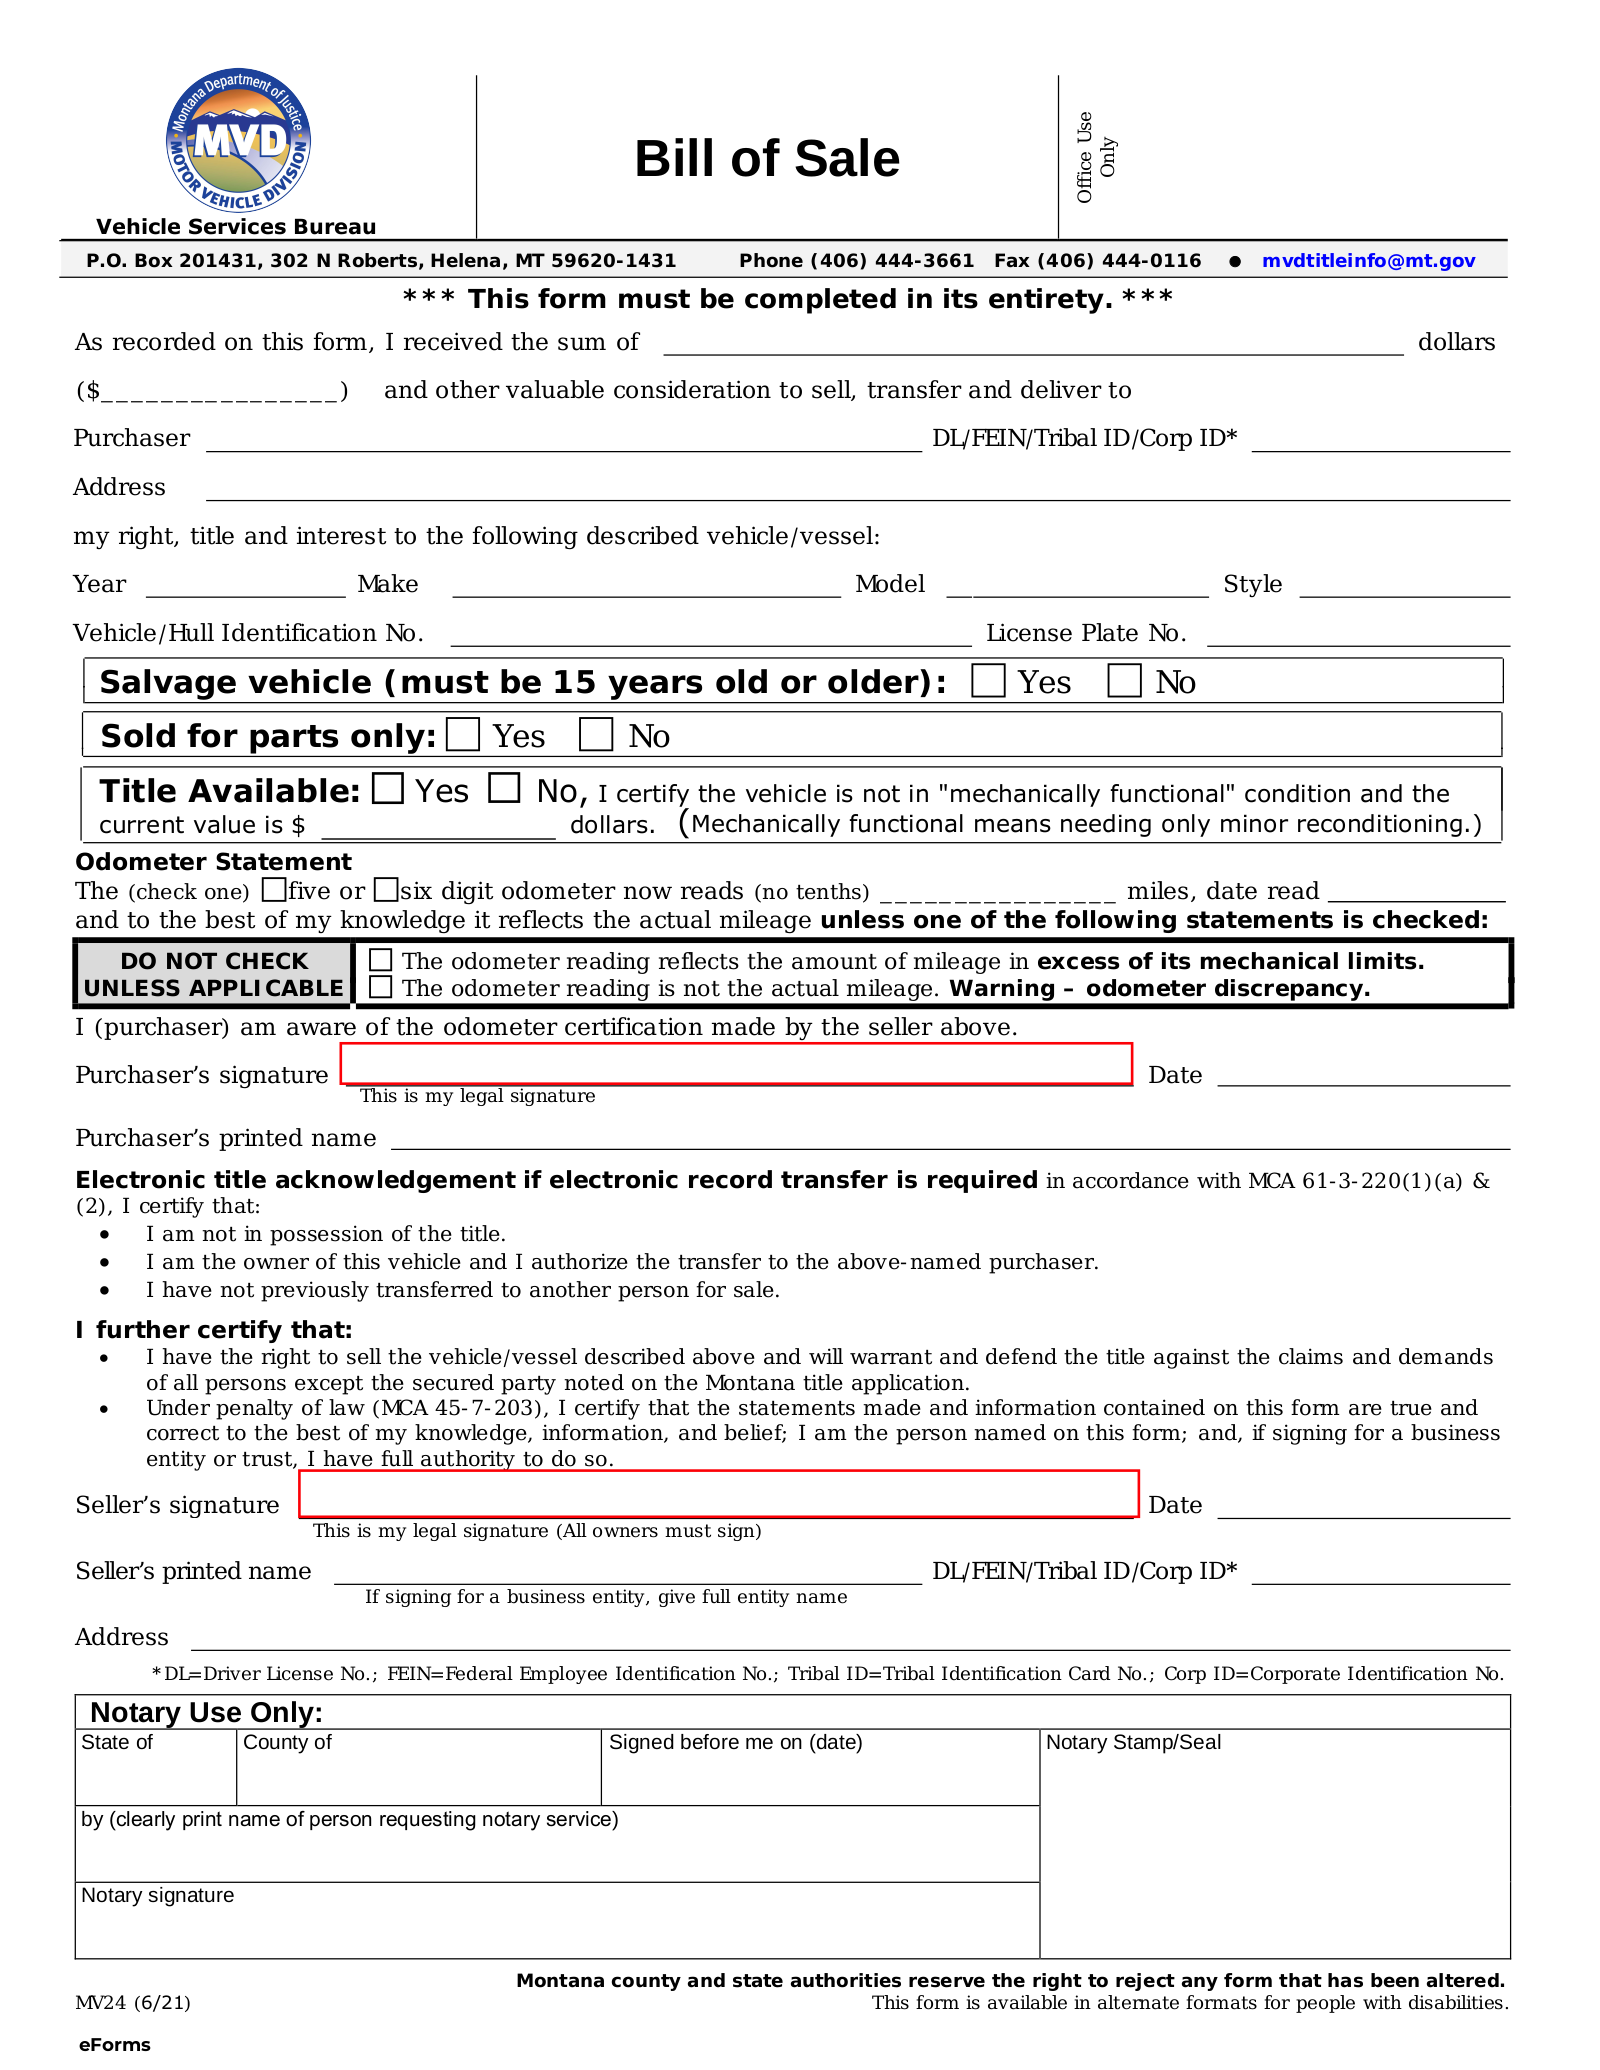 Montana Bill of Sale Forms (4)